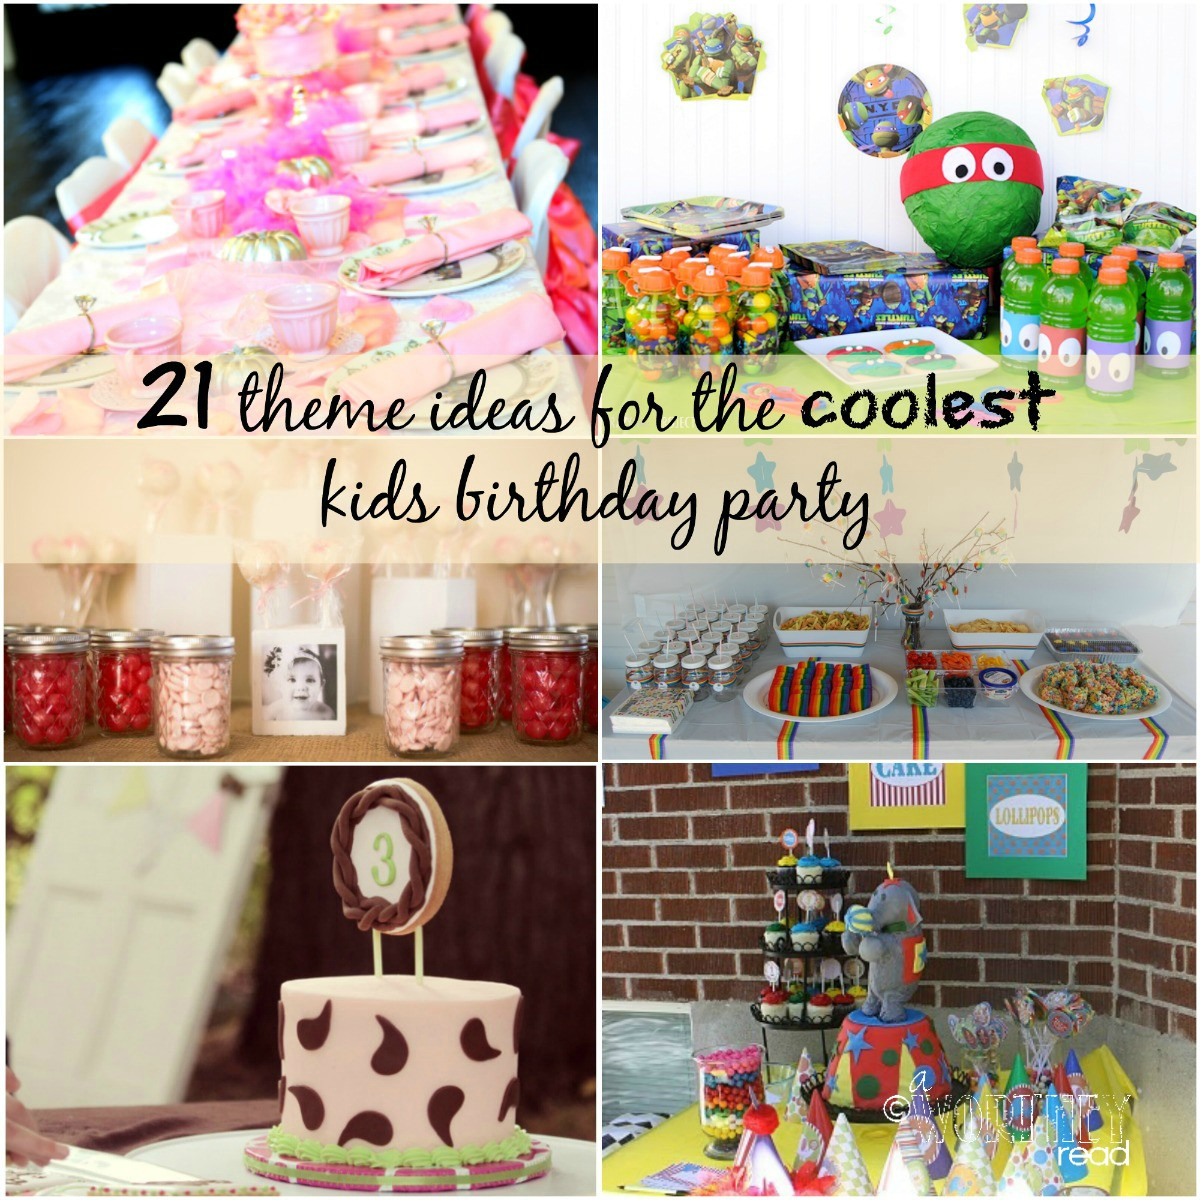 Kids Birthday Gift Ideas
 21 Theme Ideas for the Coolest Kids Birthday Party